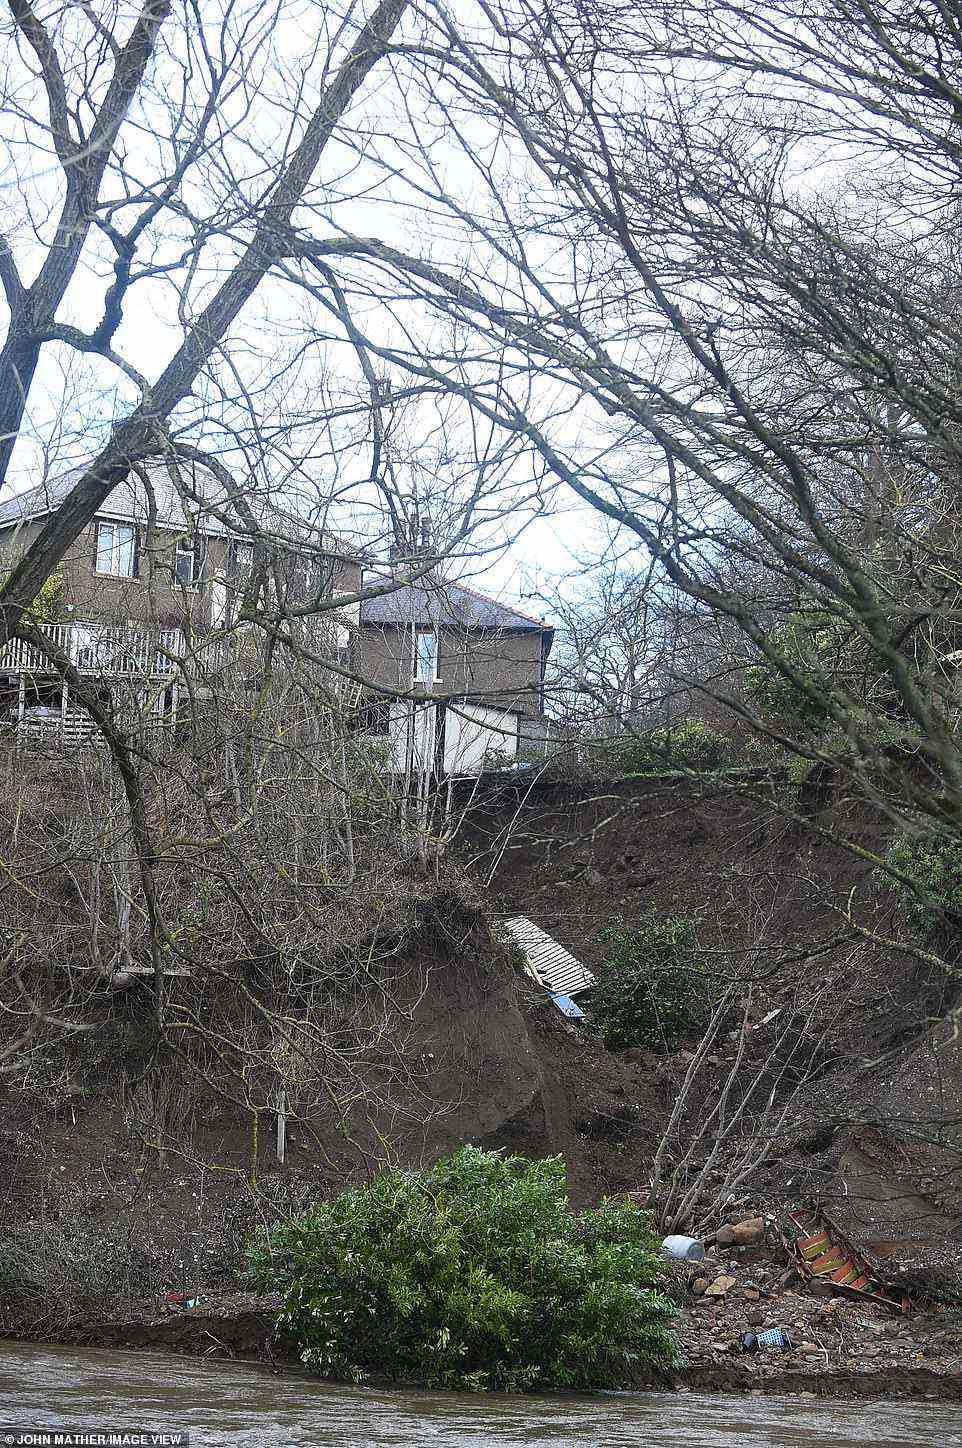 A landslip behind a house in Keighley, West Yorkshire, has taken away the garden and part of the property into a river below